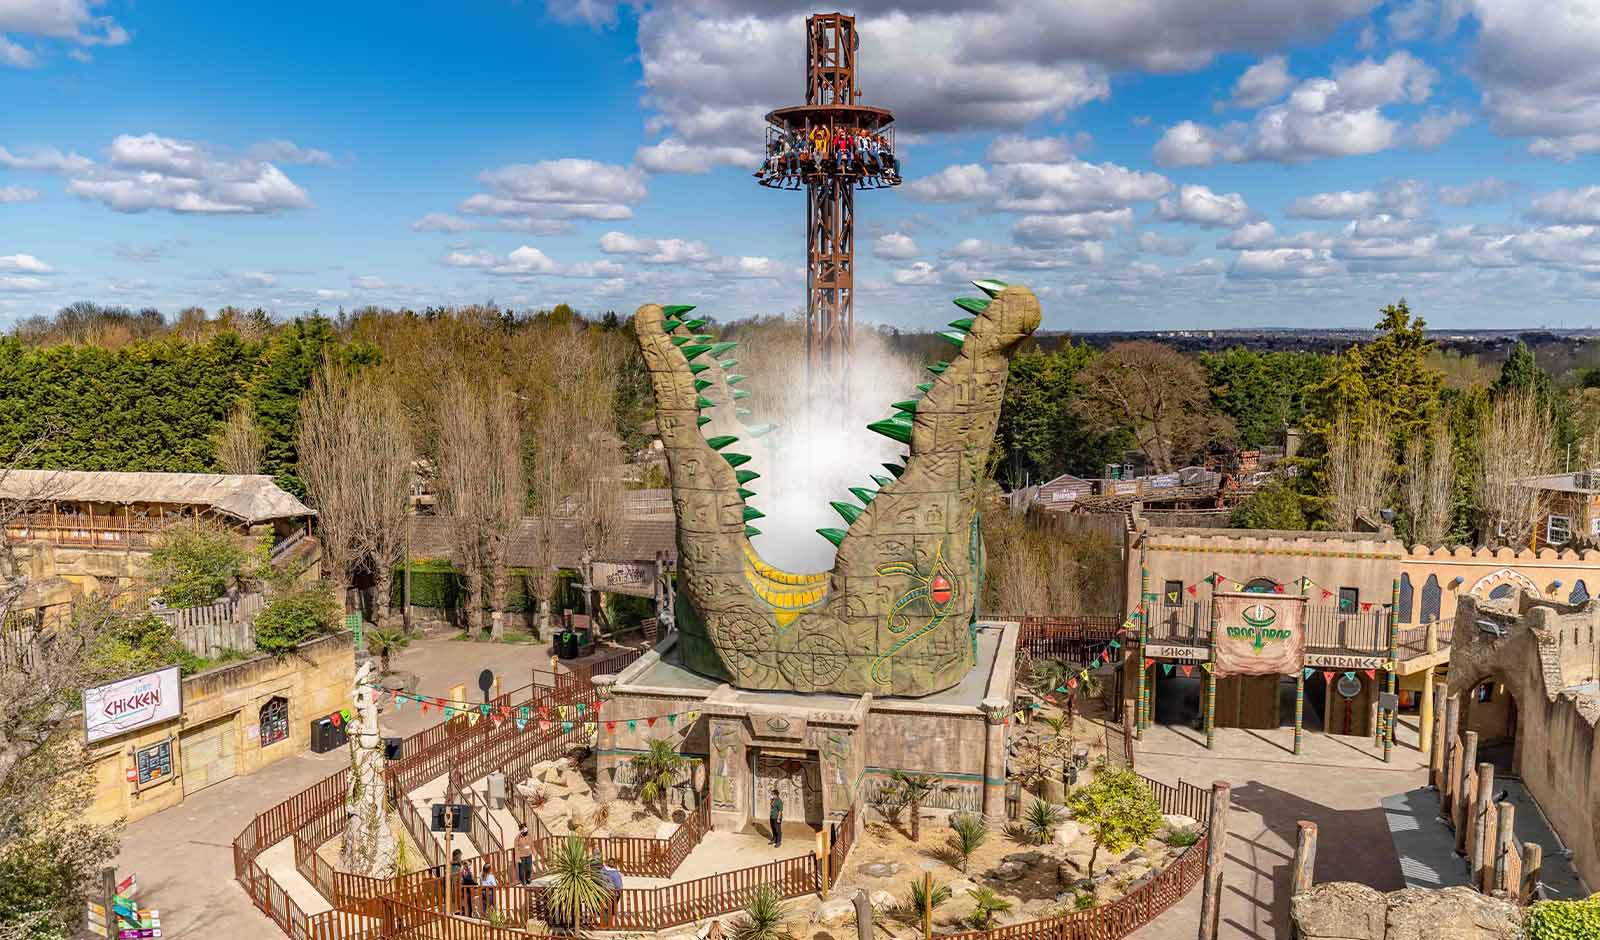 Discover adventure today at Chessington World of Adventure's